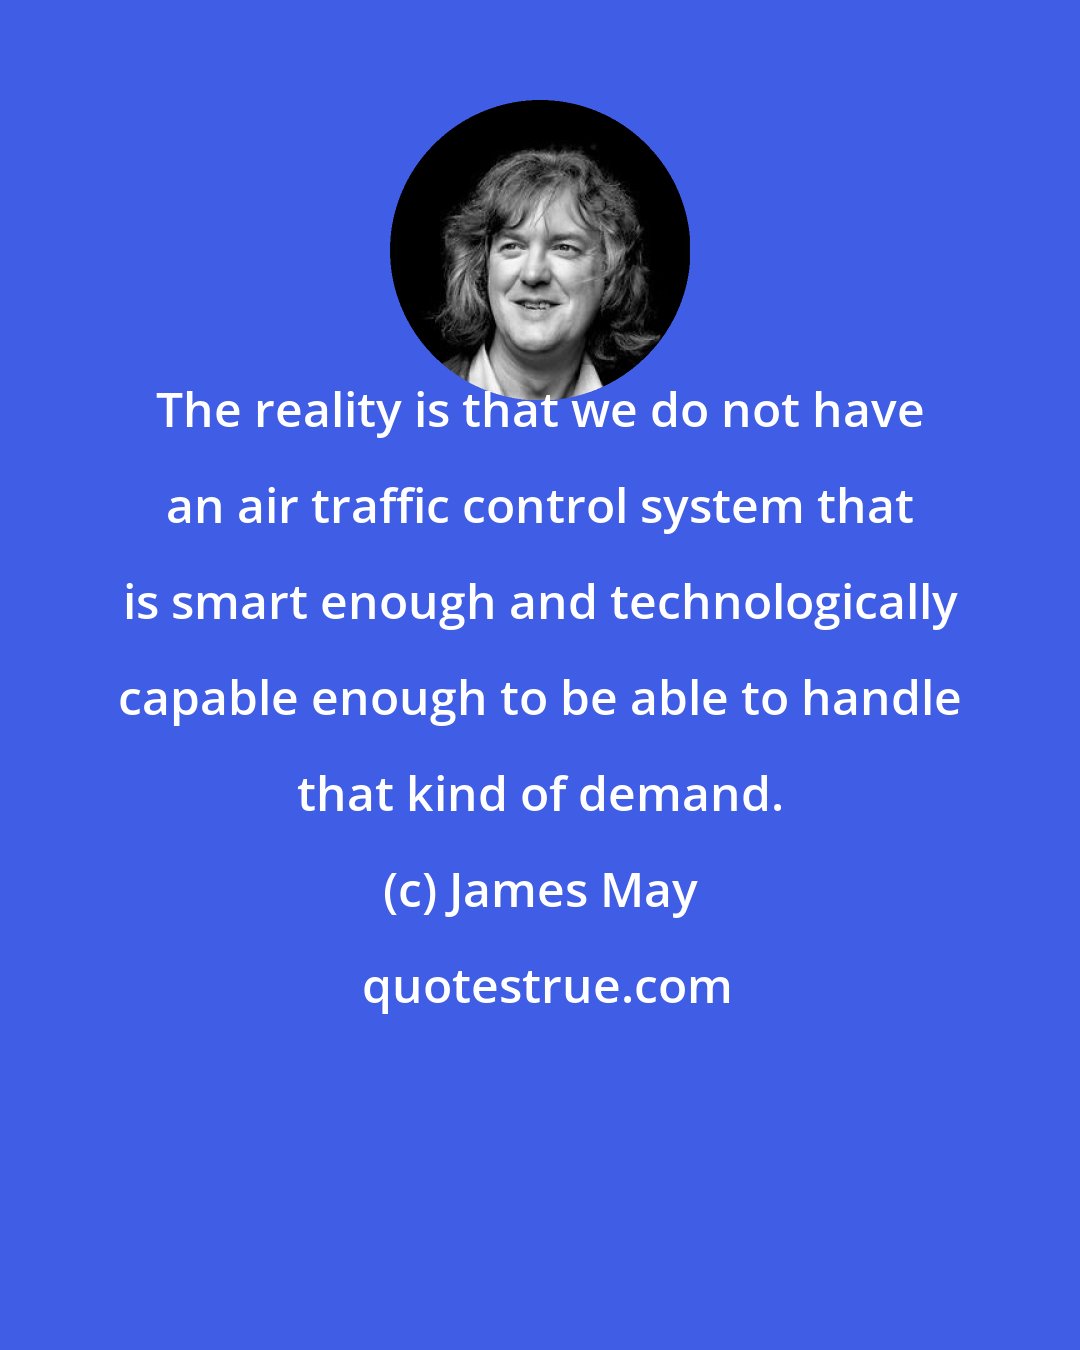 James May: The reality is that we do not have an air traffic control system that is smart enough and technologically capable enough to be able to handle that kind of demand.